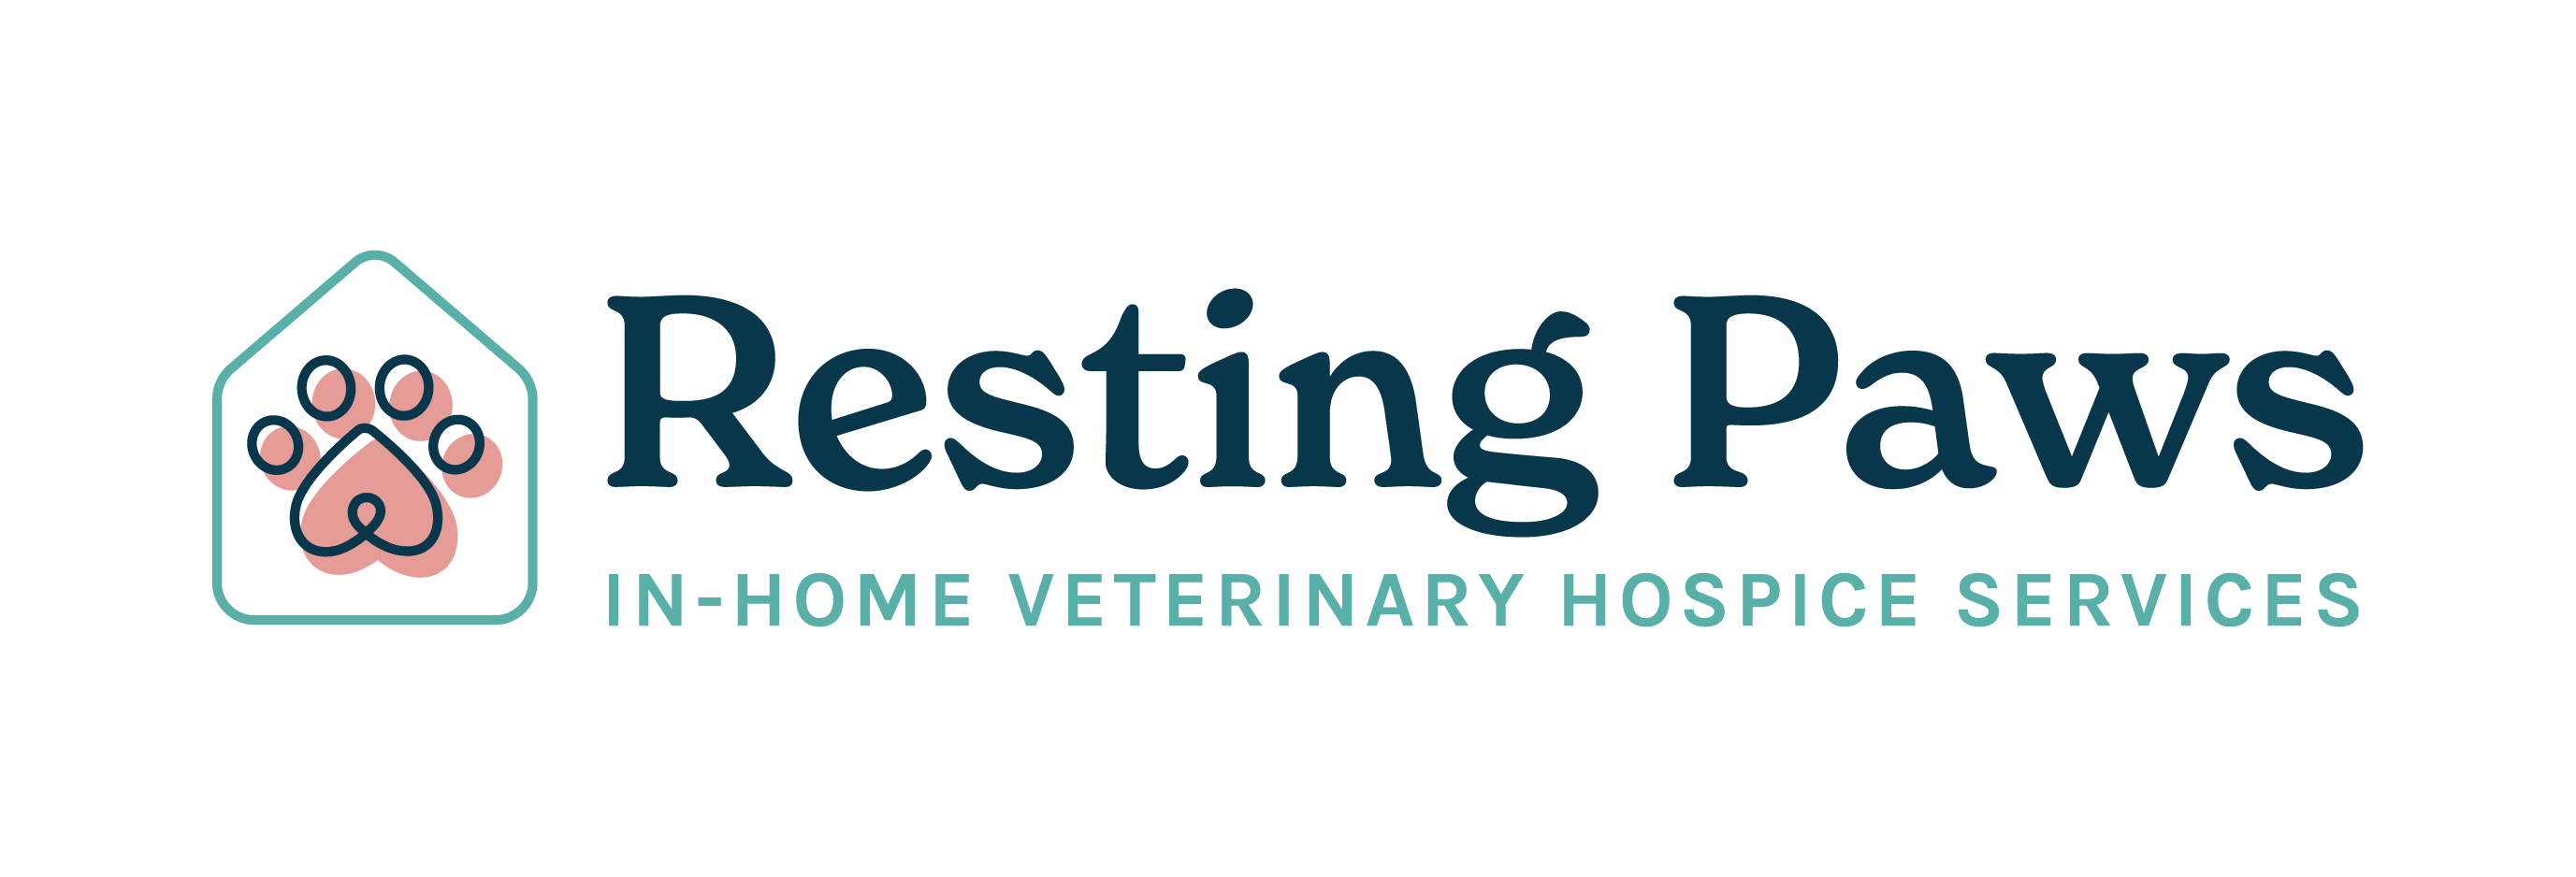 Resting Paws In-Home Veterinary Hospice Services